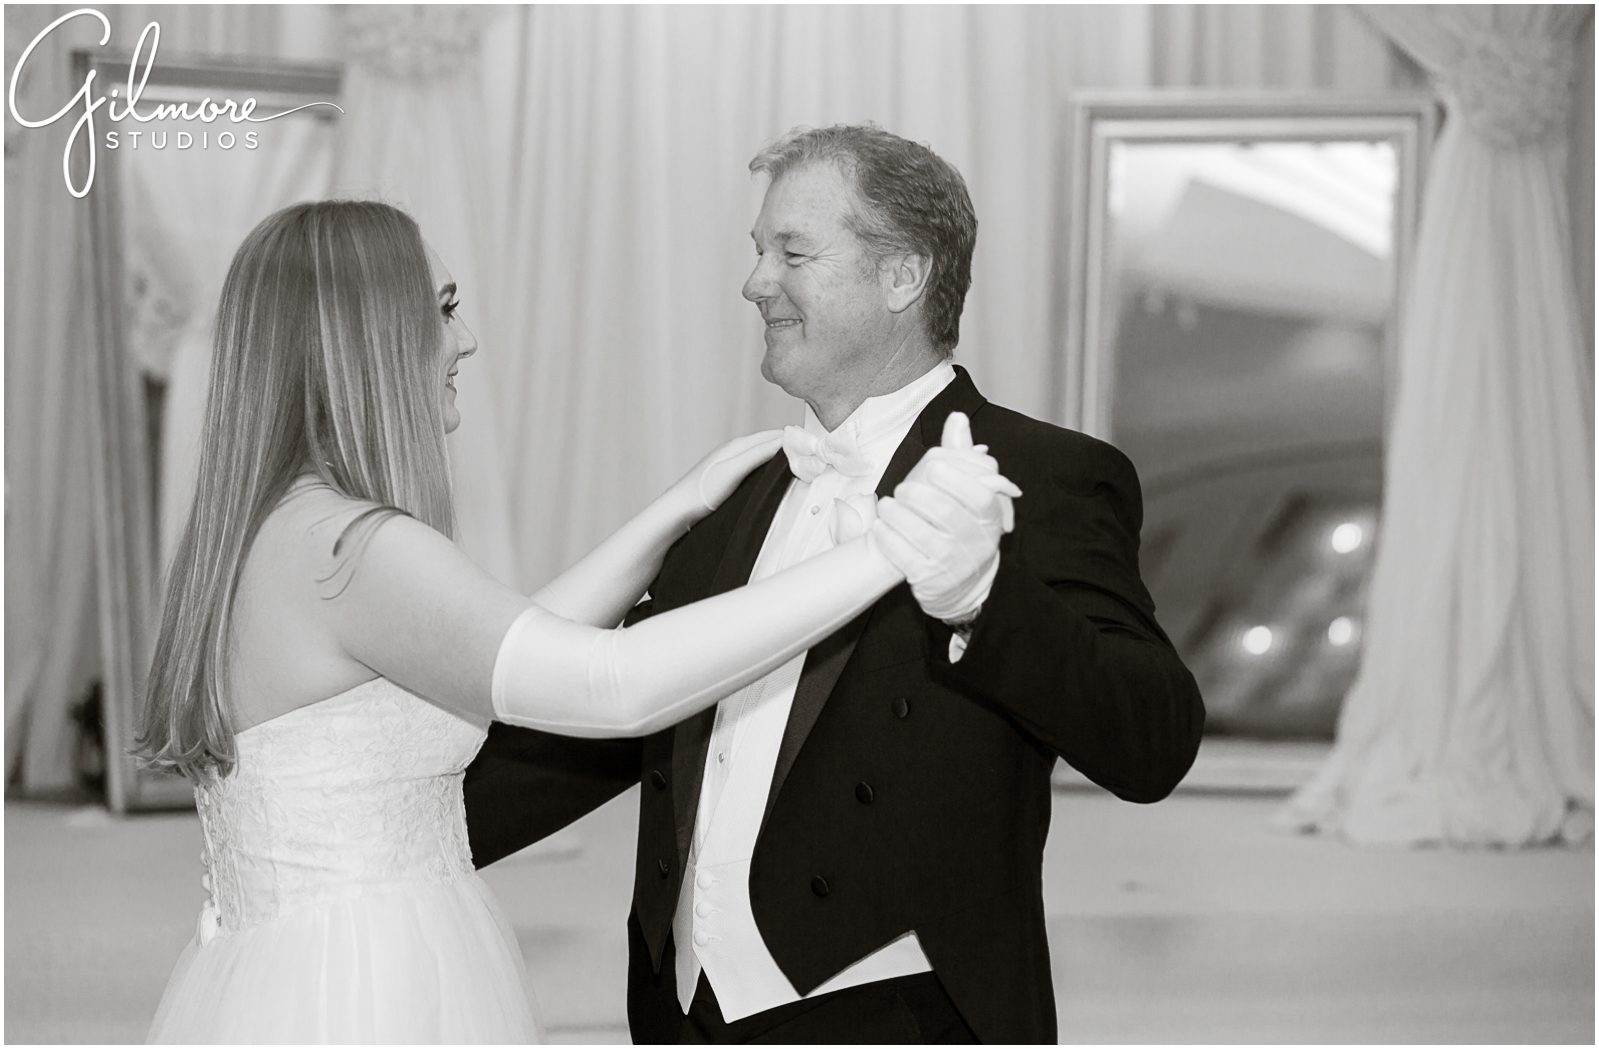 waltz at the deb ball, father and daughter, Debutante ball photographer